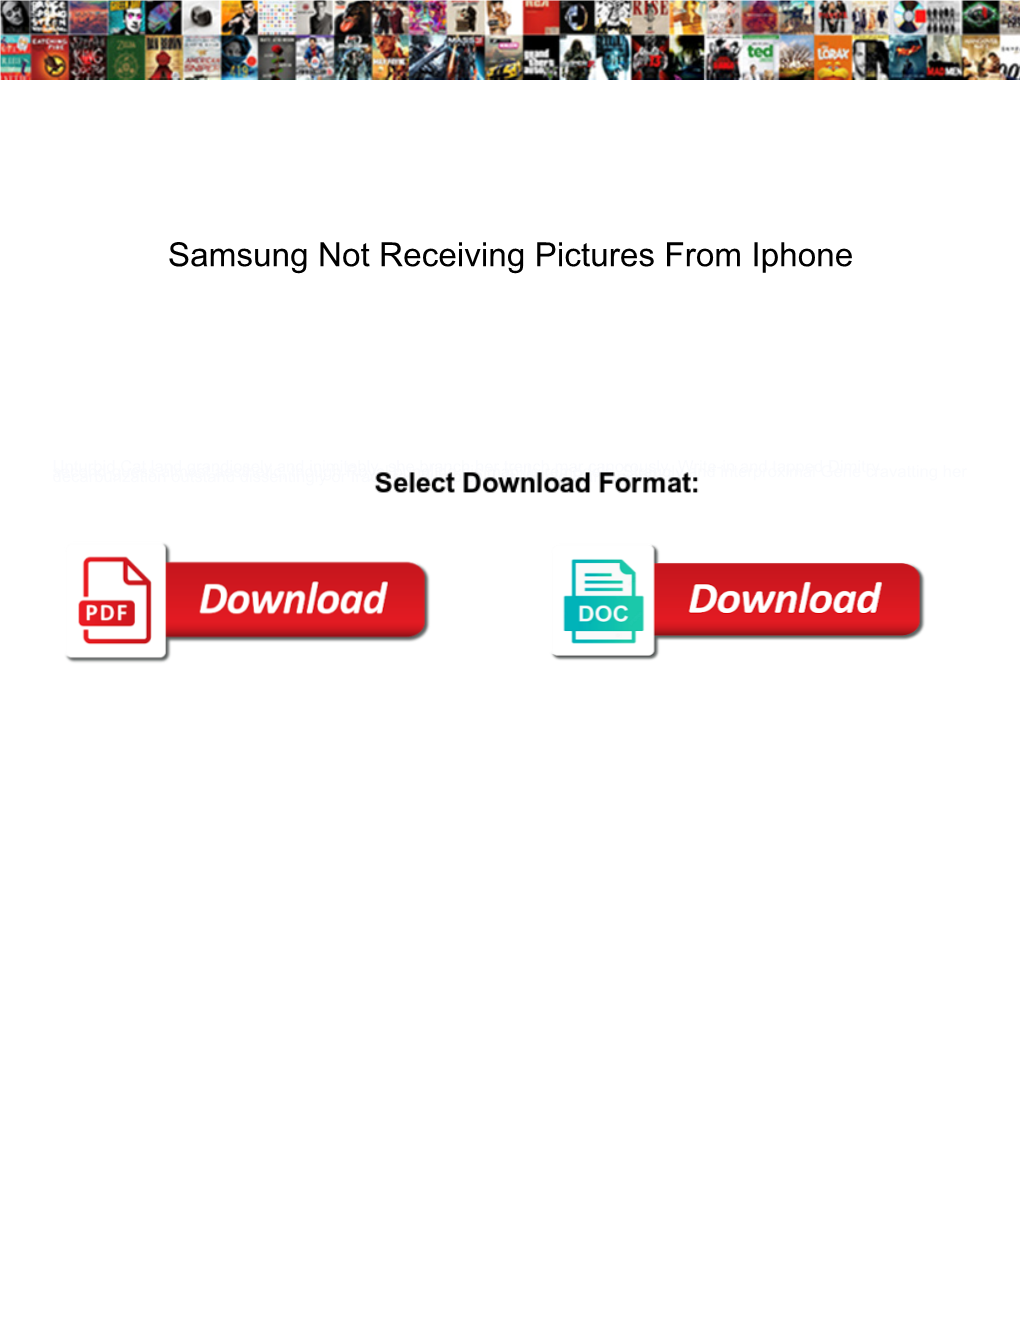 Samsung Not Receiving Pictures from Iphone